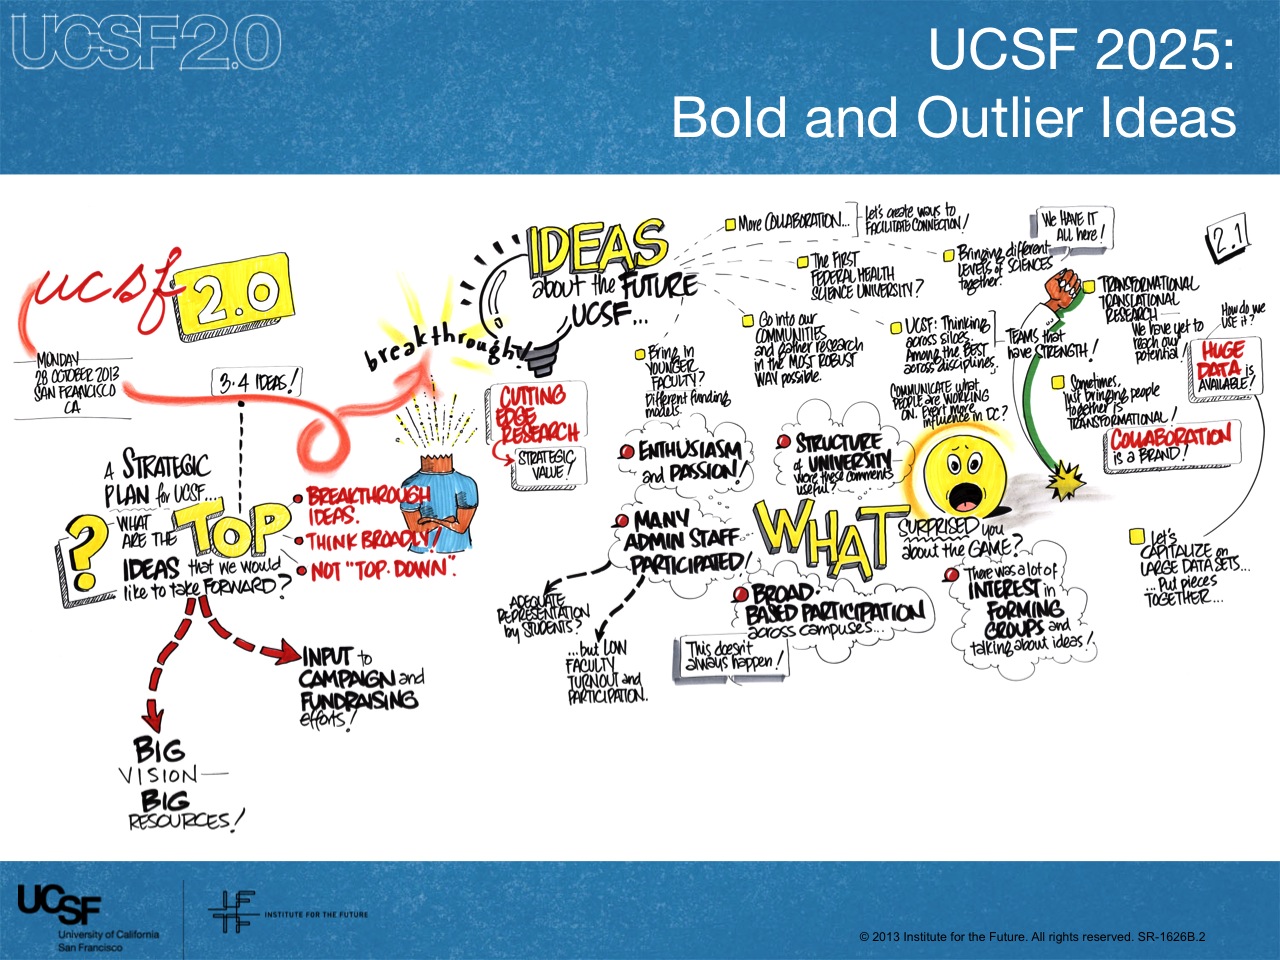 graphical representation of the bold ideas being explored in UCSF 2.0.